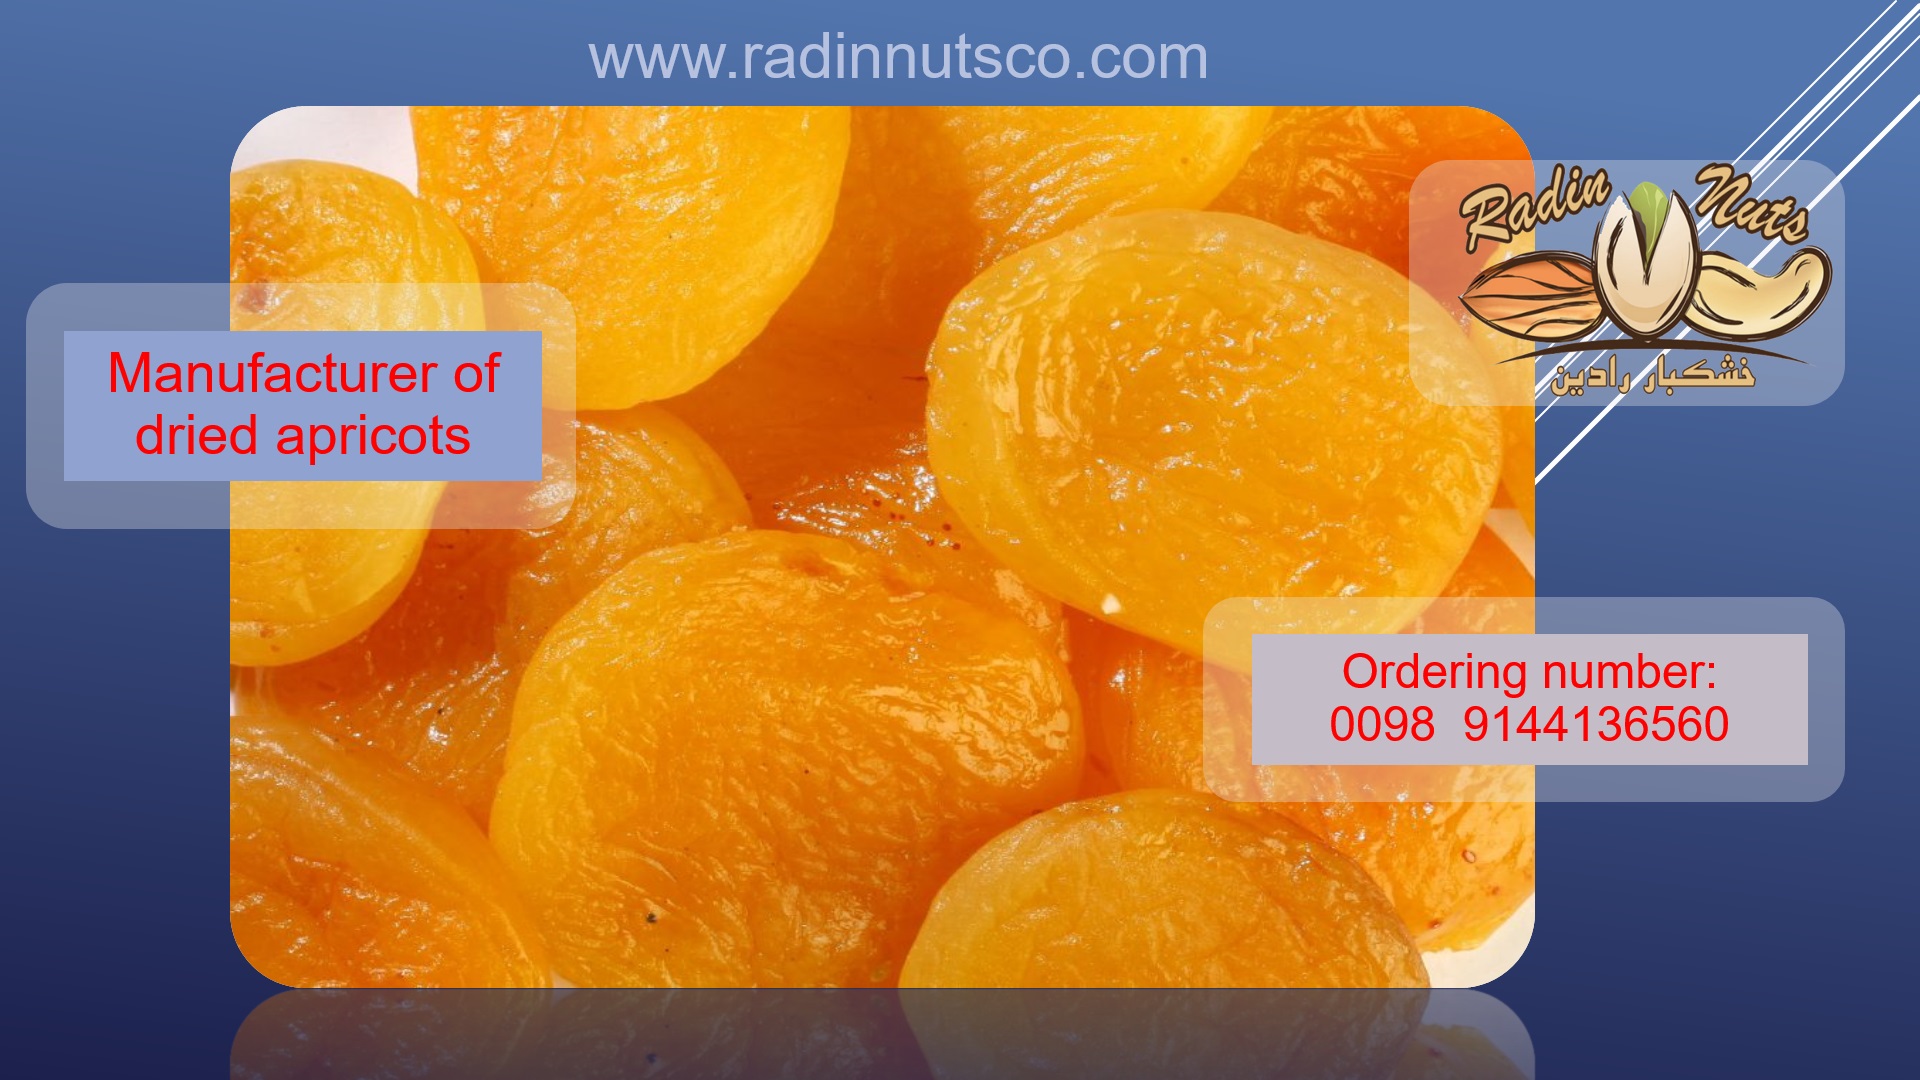 Applications of dried apricots